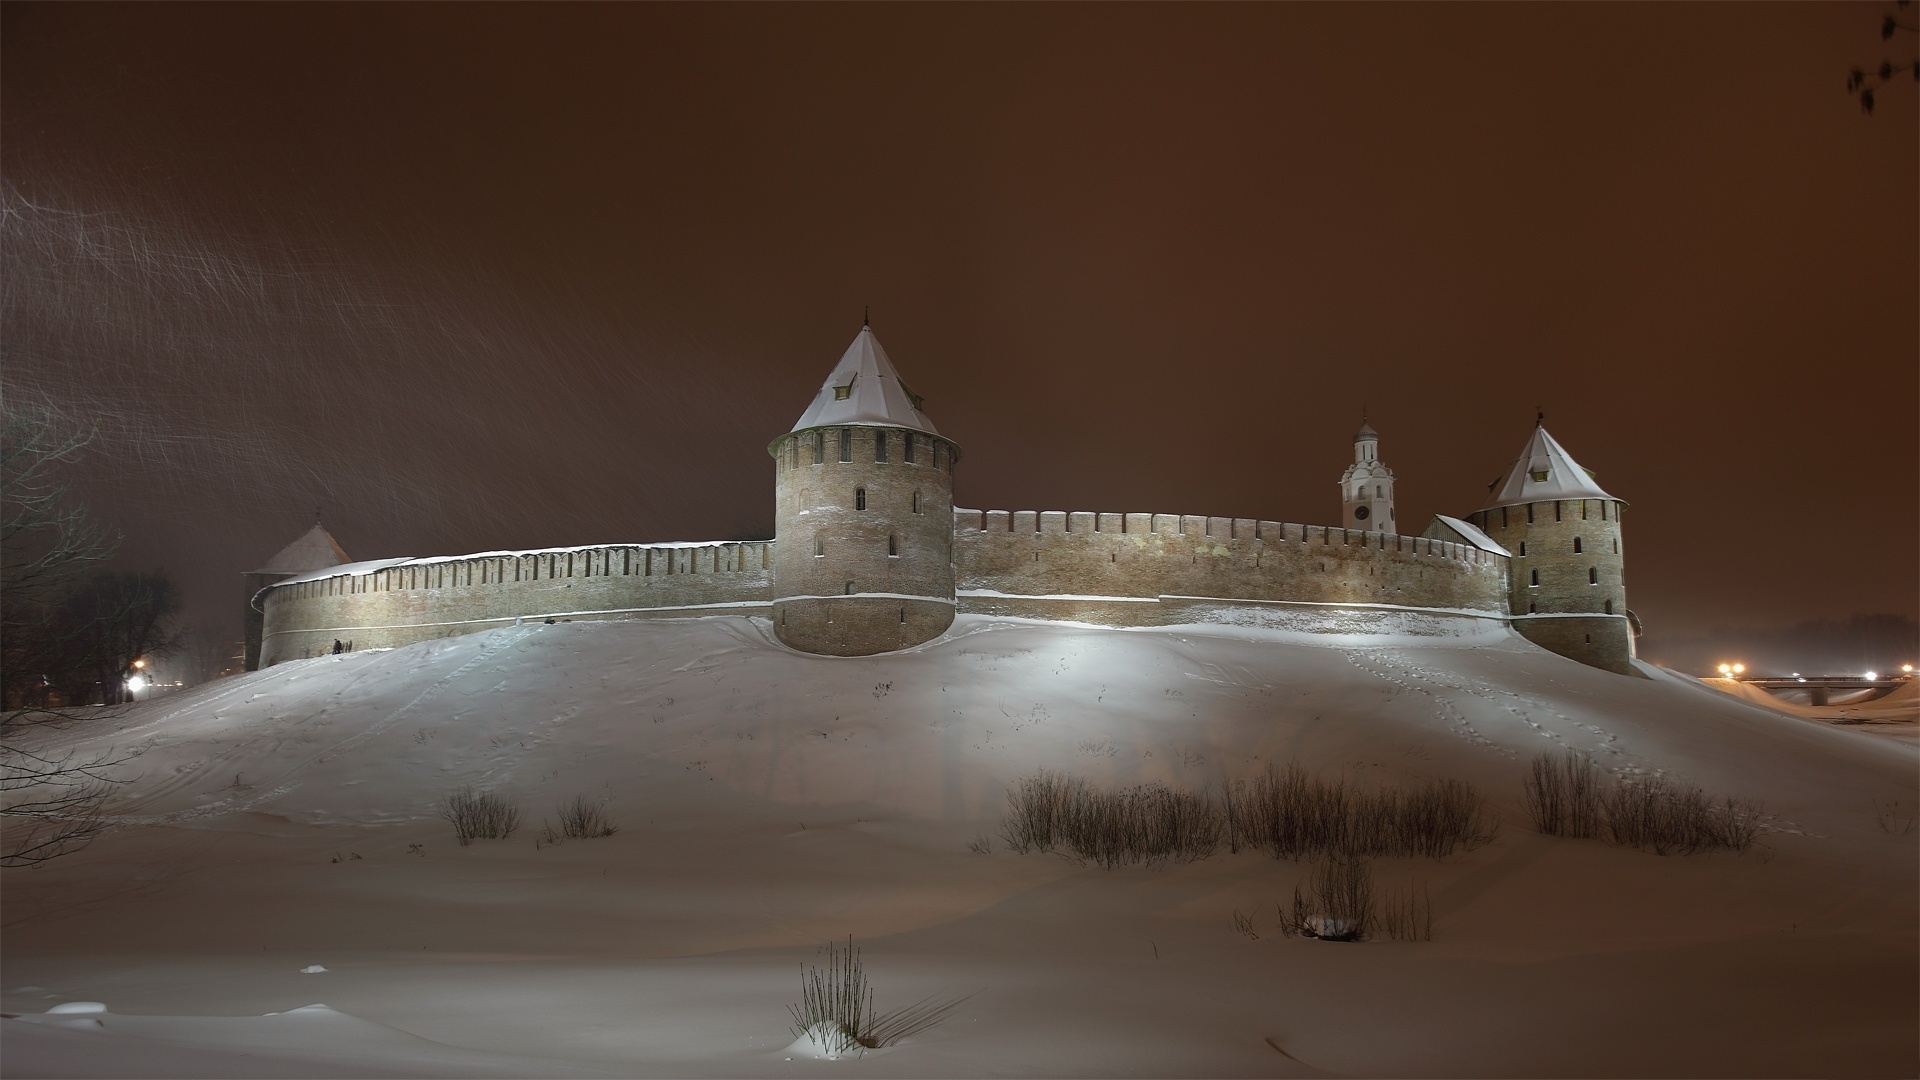 General 1920x1080 architecture castle nature landscape trees forest snow winter night tower snowing Russia long exposure